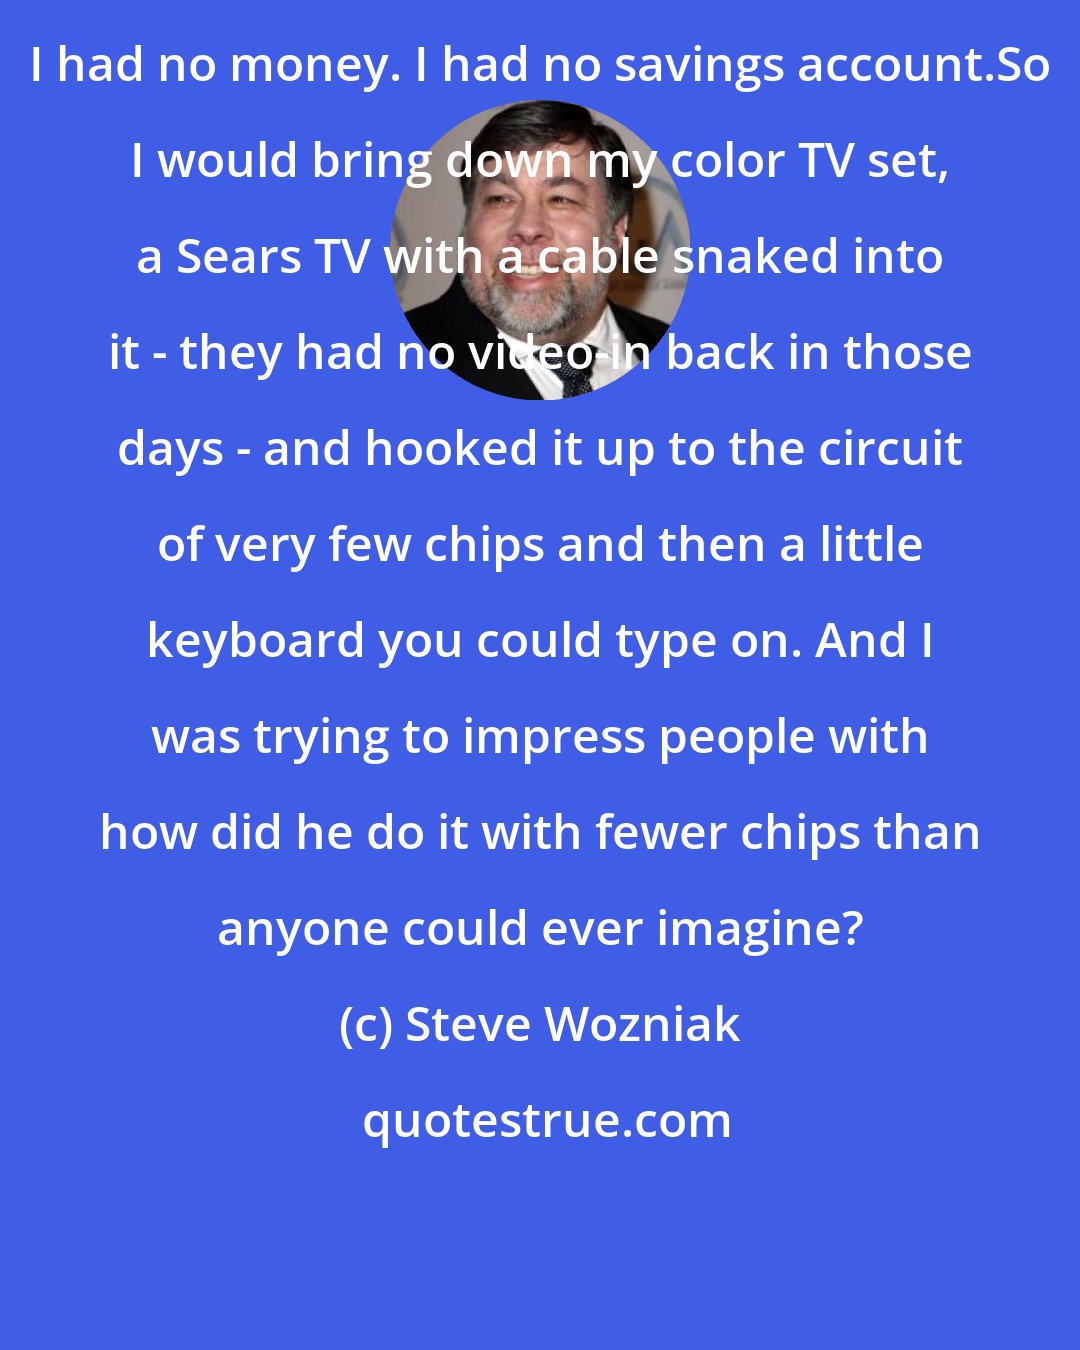 Steve Wozniak: I had no money. I had no savings account.So I would bring down my color TV set, a Sears TV with a cable snaked into it - they had no video-in back in those days - and hooked it up to the circuit of very few chips and then a little keyboard you could type on. And I was trying to impress people with how did he do it with fewer chips than anyone could ever imagine?